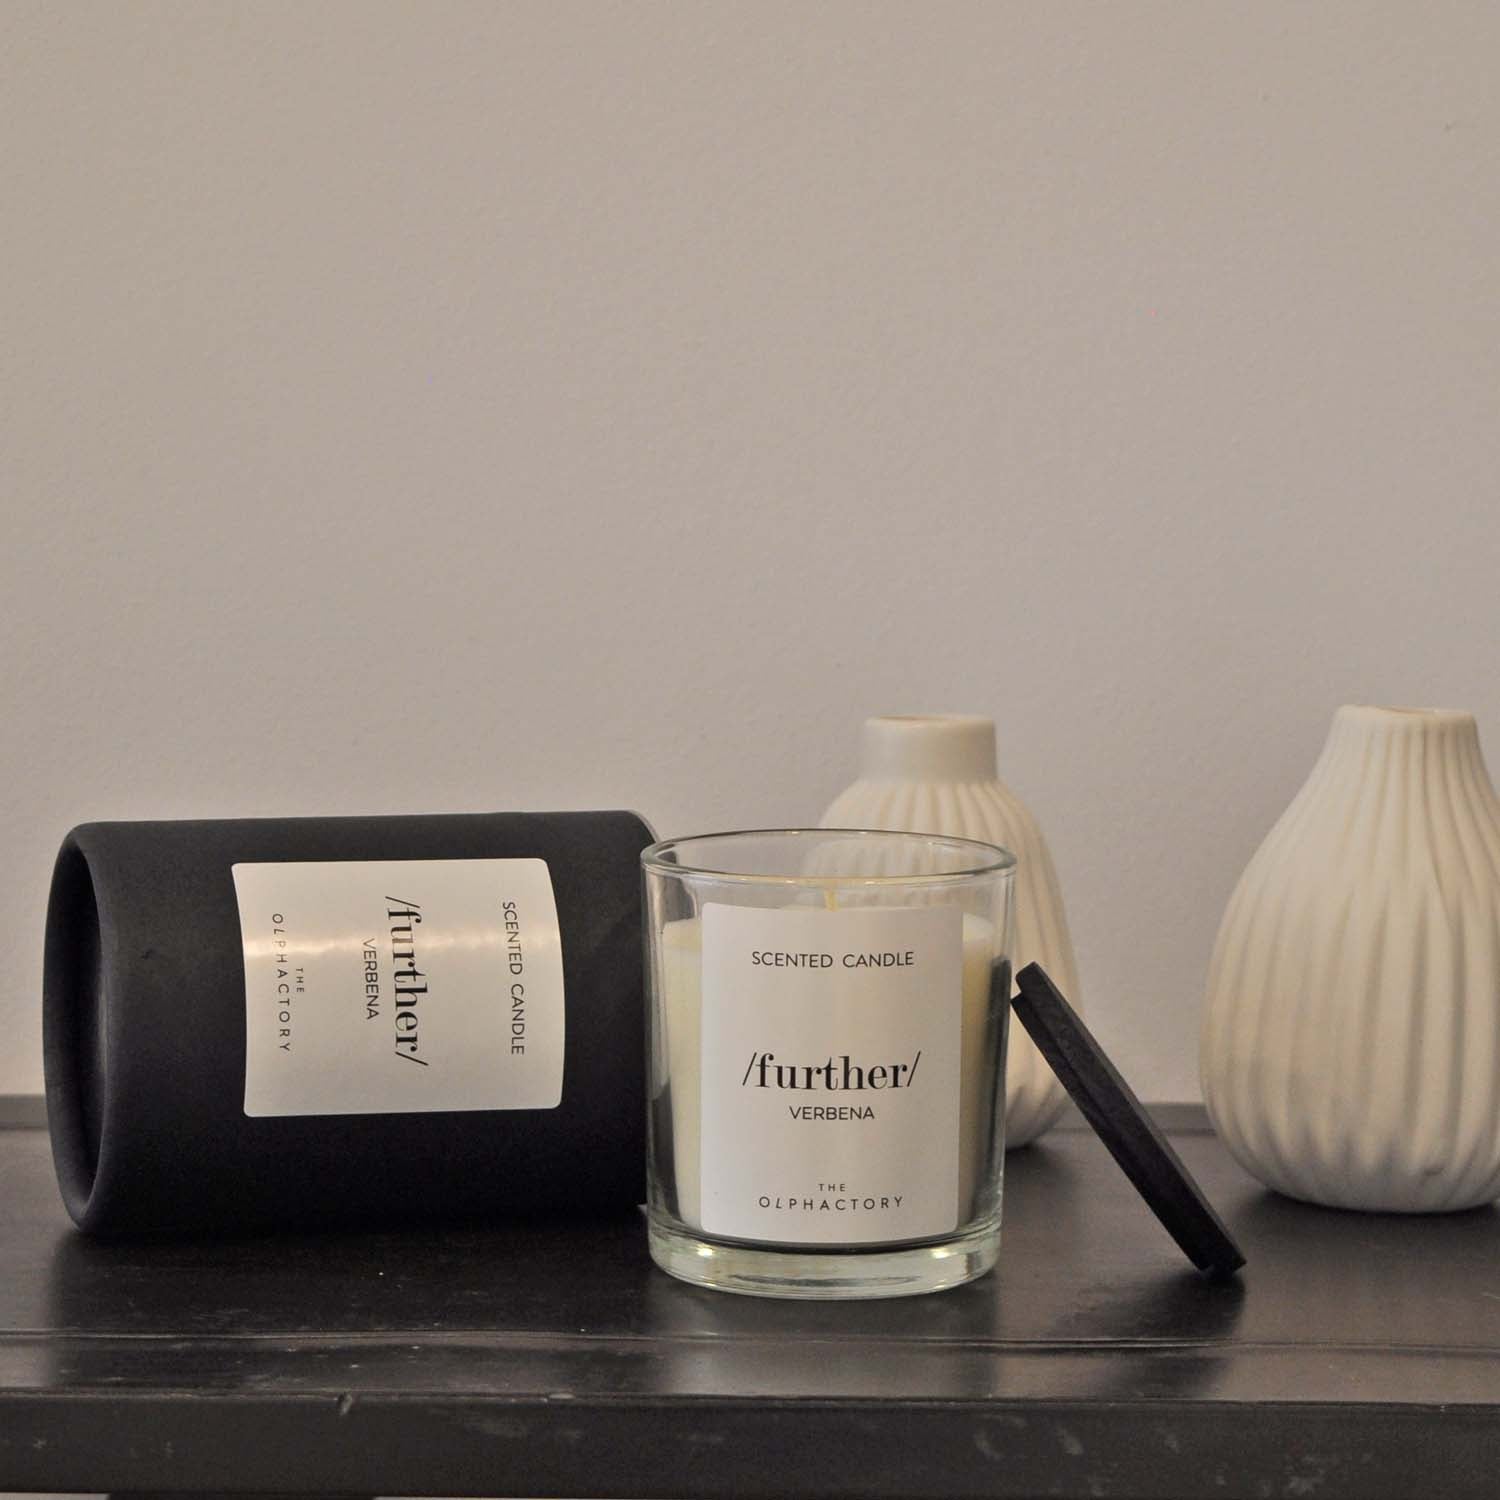 Scented Candle 40h- The Olphactory Black- Verbena